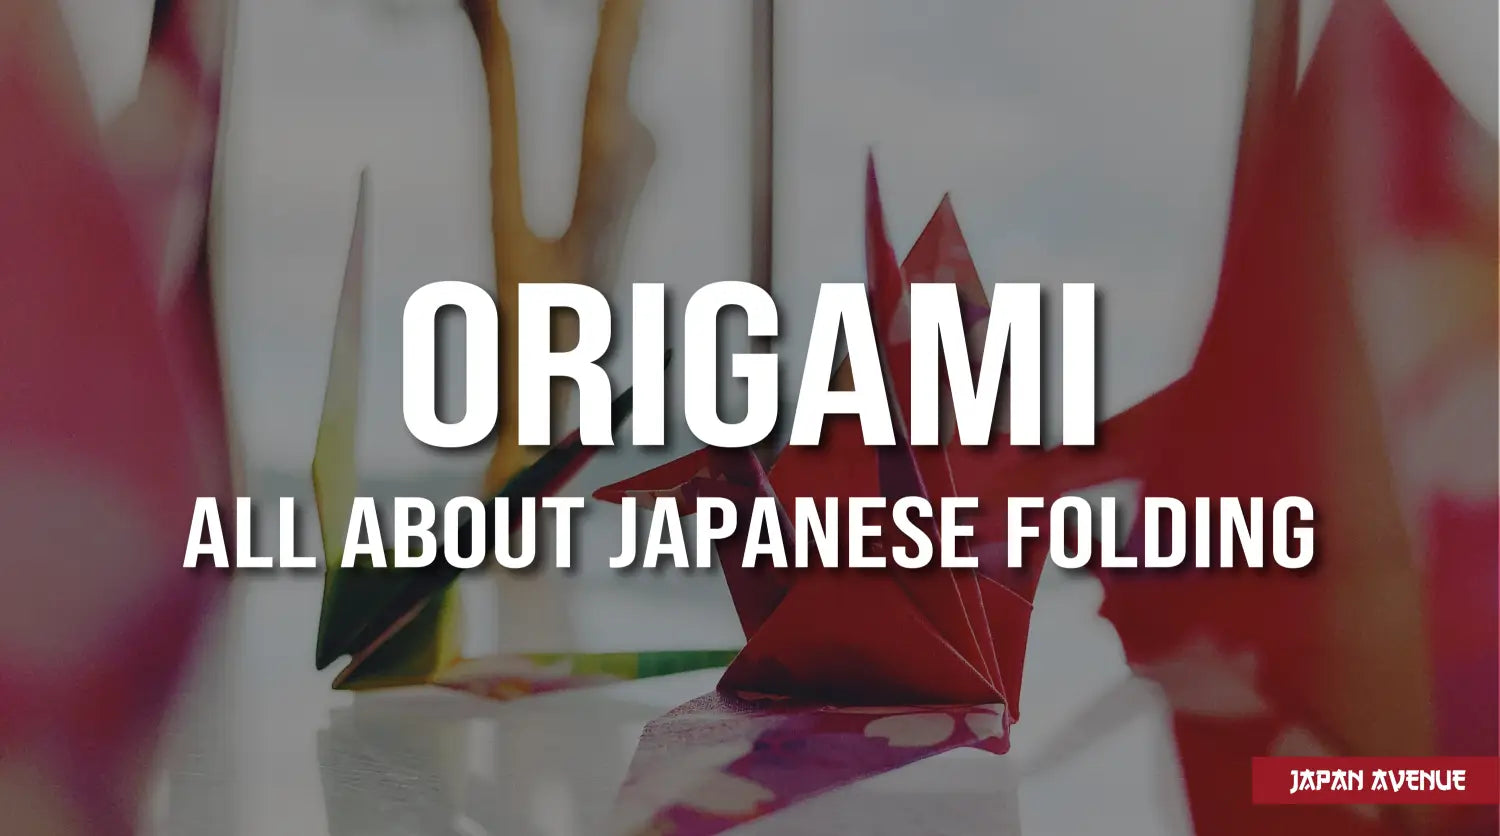 The Beauty of ORIGAMI book from Japan Japanese paper folding